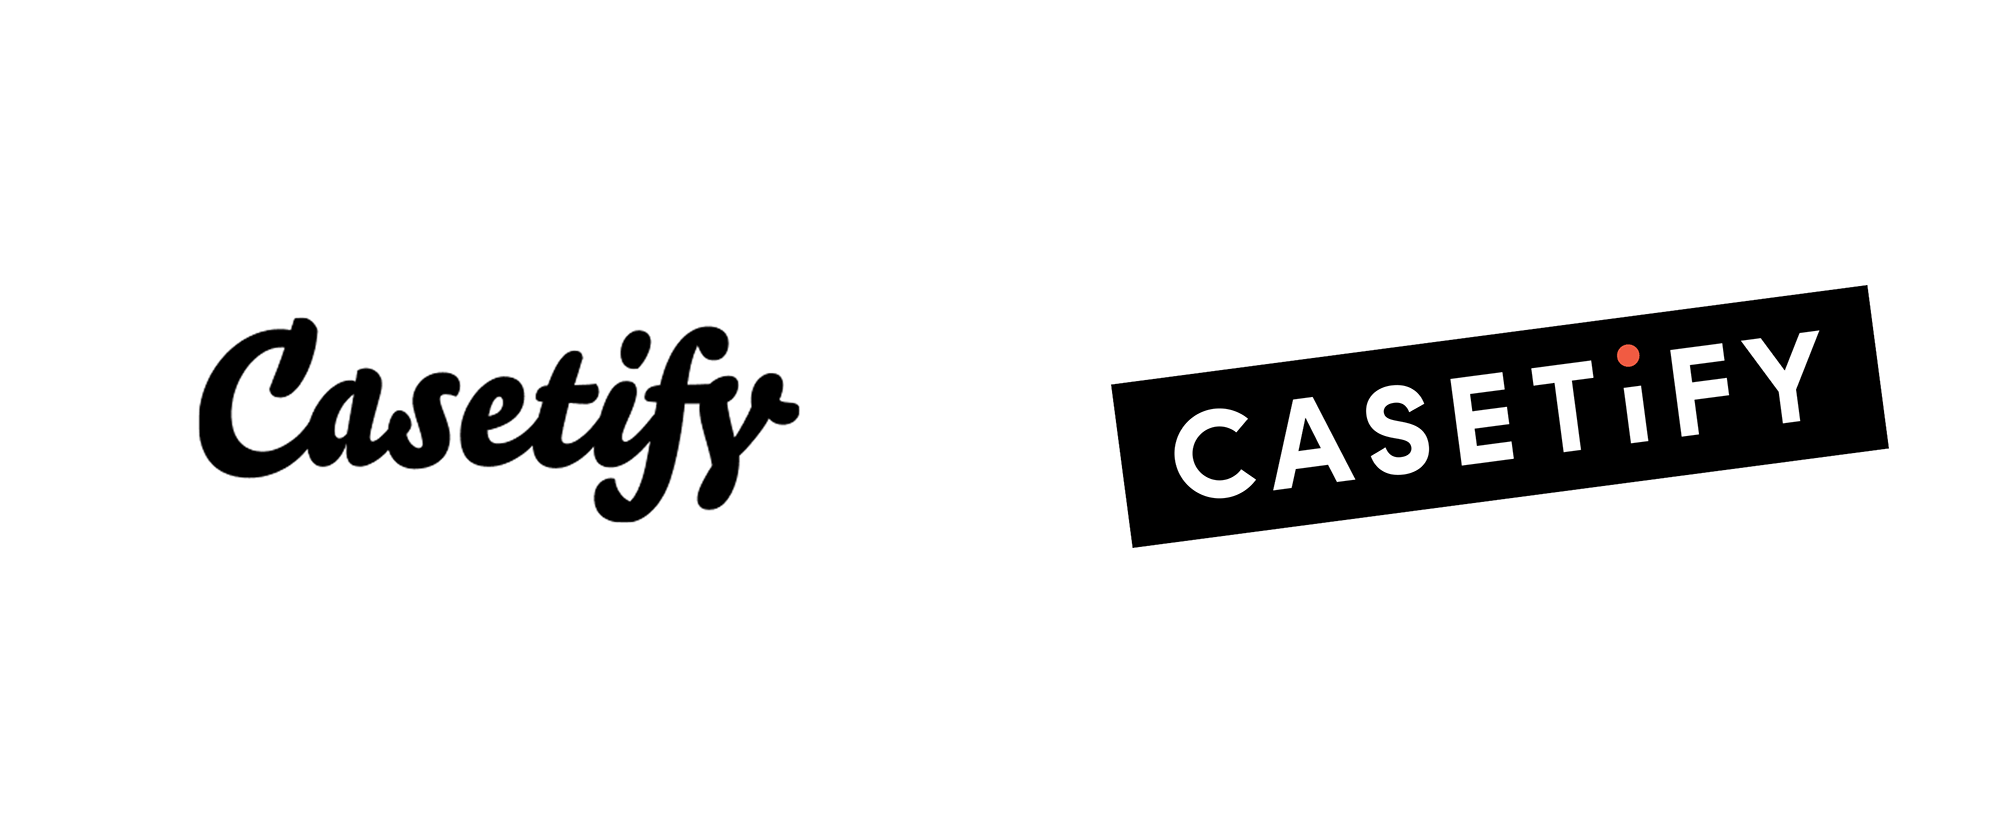 New Logo and Identity for Casetify by AfterAll Studio